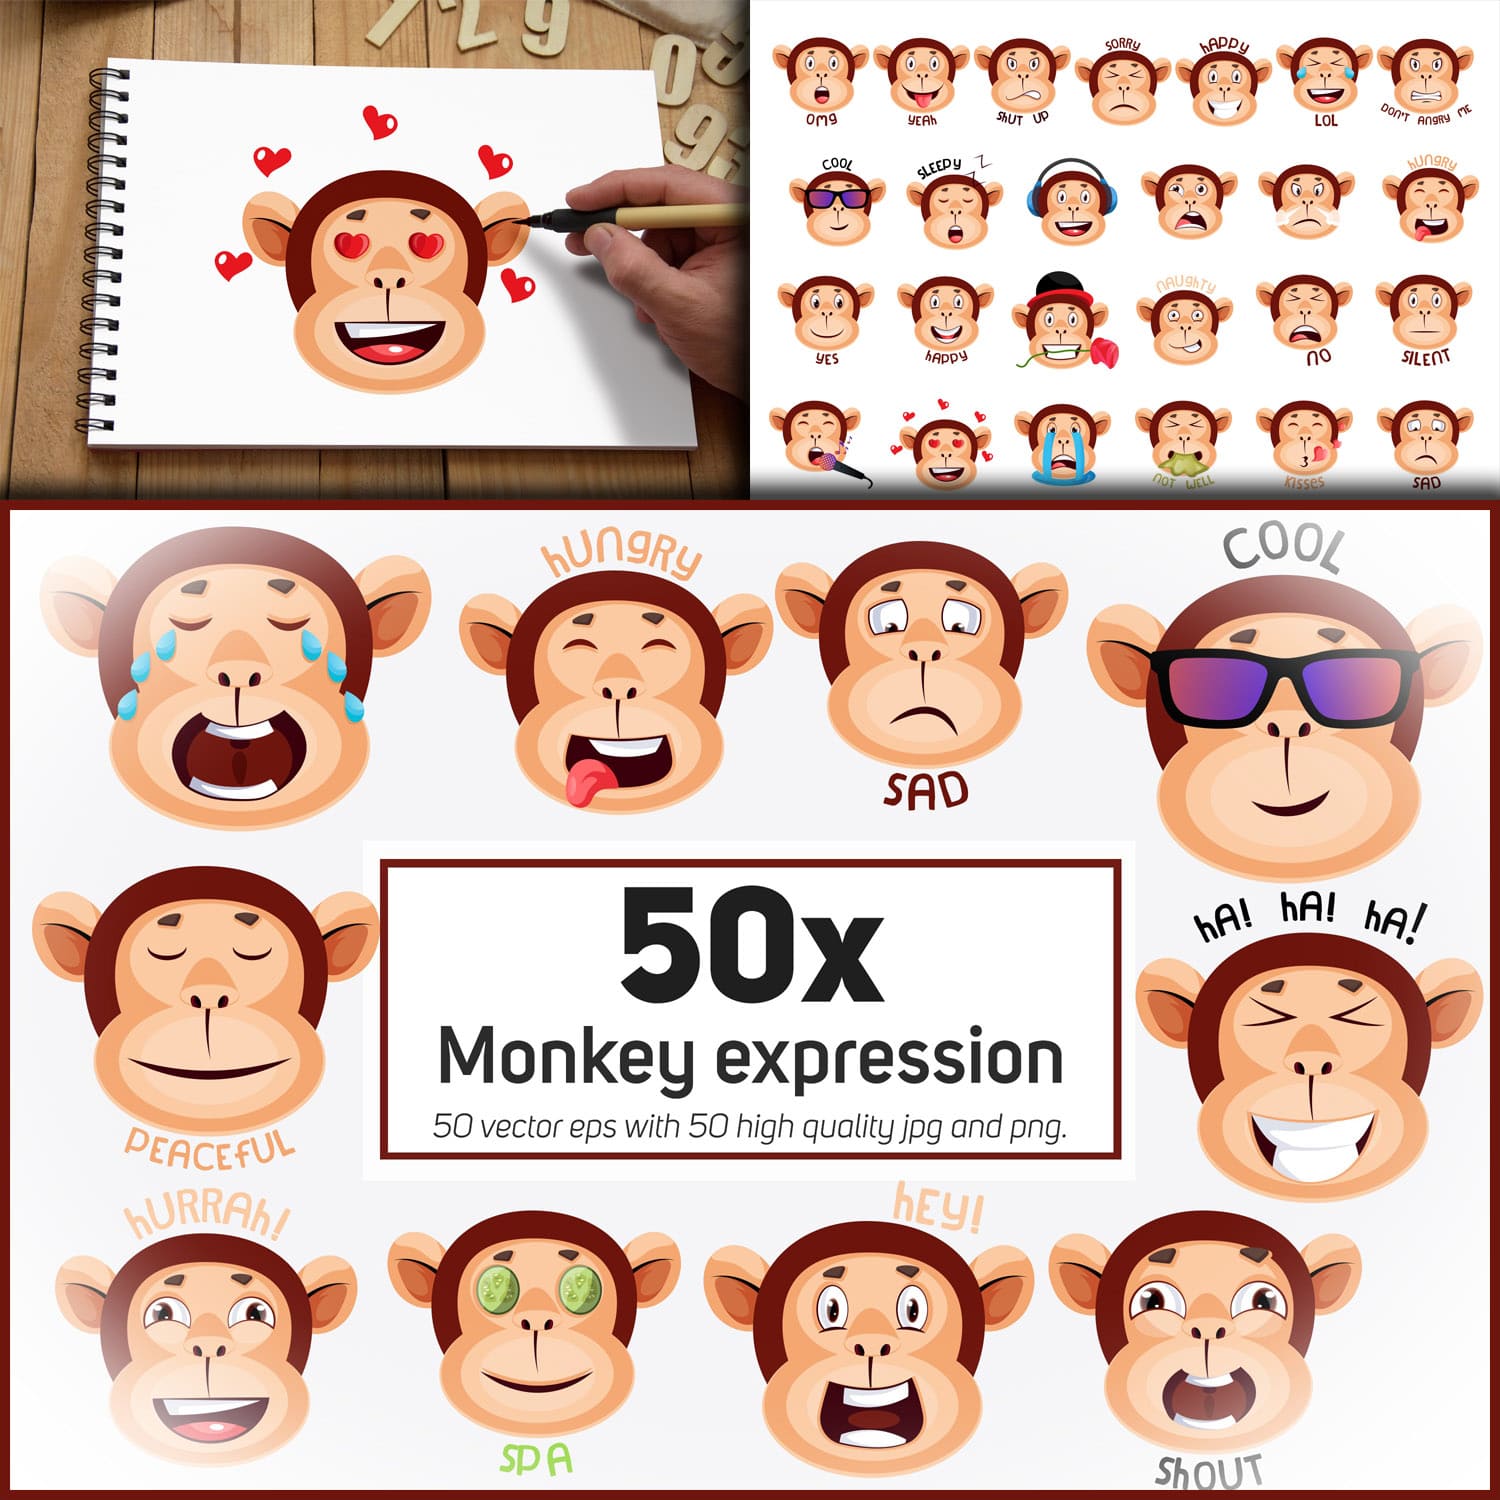 Preview monkey expression emoticon collection illustrations.